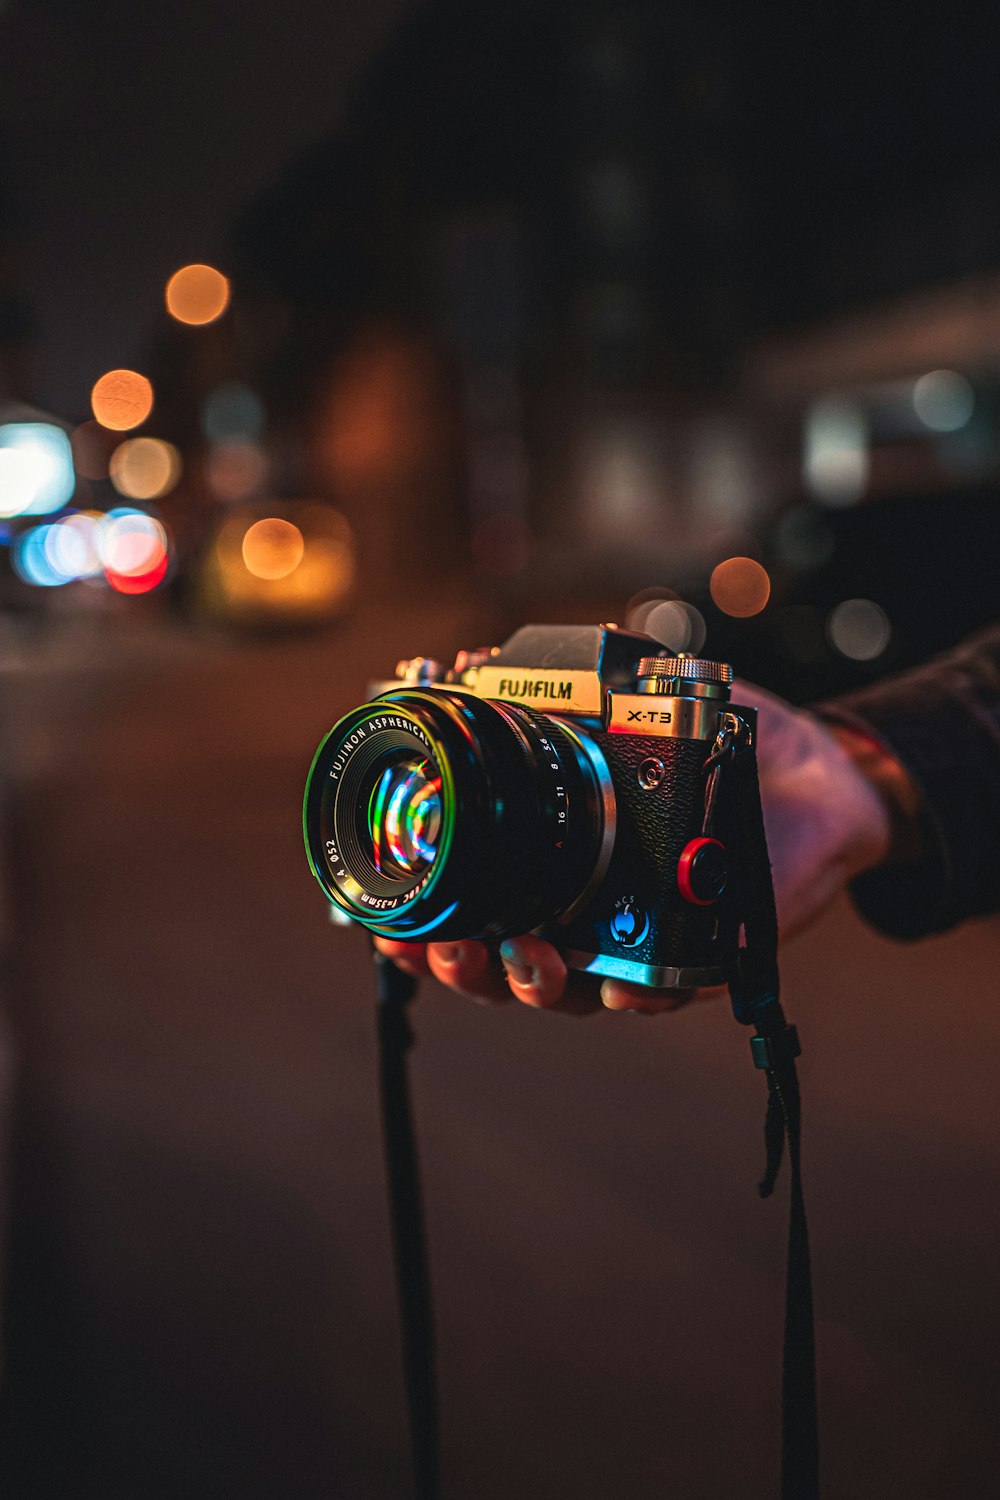 Best 500+ Camera Photos [HD] | Download Free Images & Stock Photos On  Unsplash